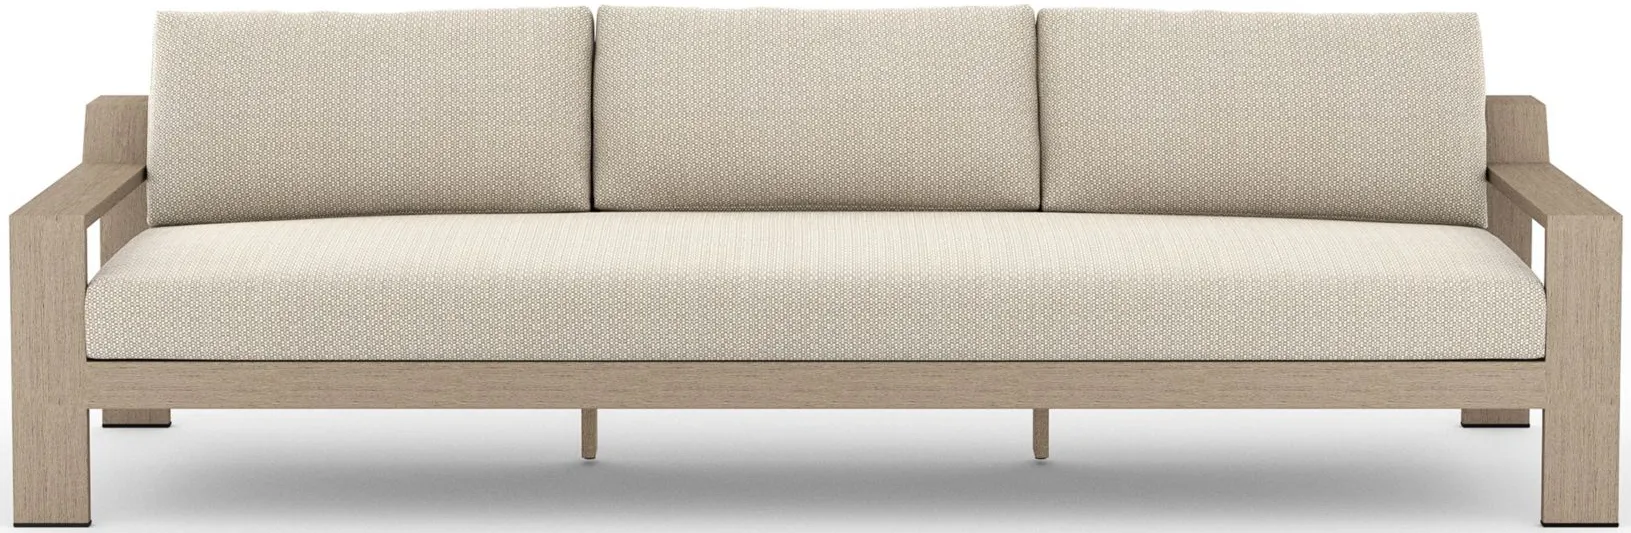 Monterey Outdoor 106" Sofa in Faye Sand by Four Hands